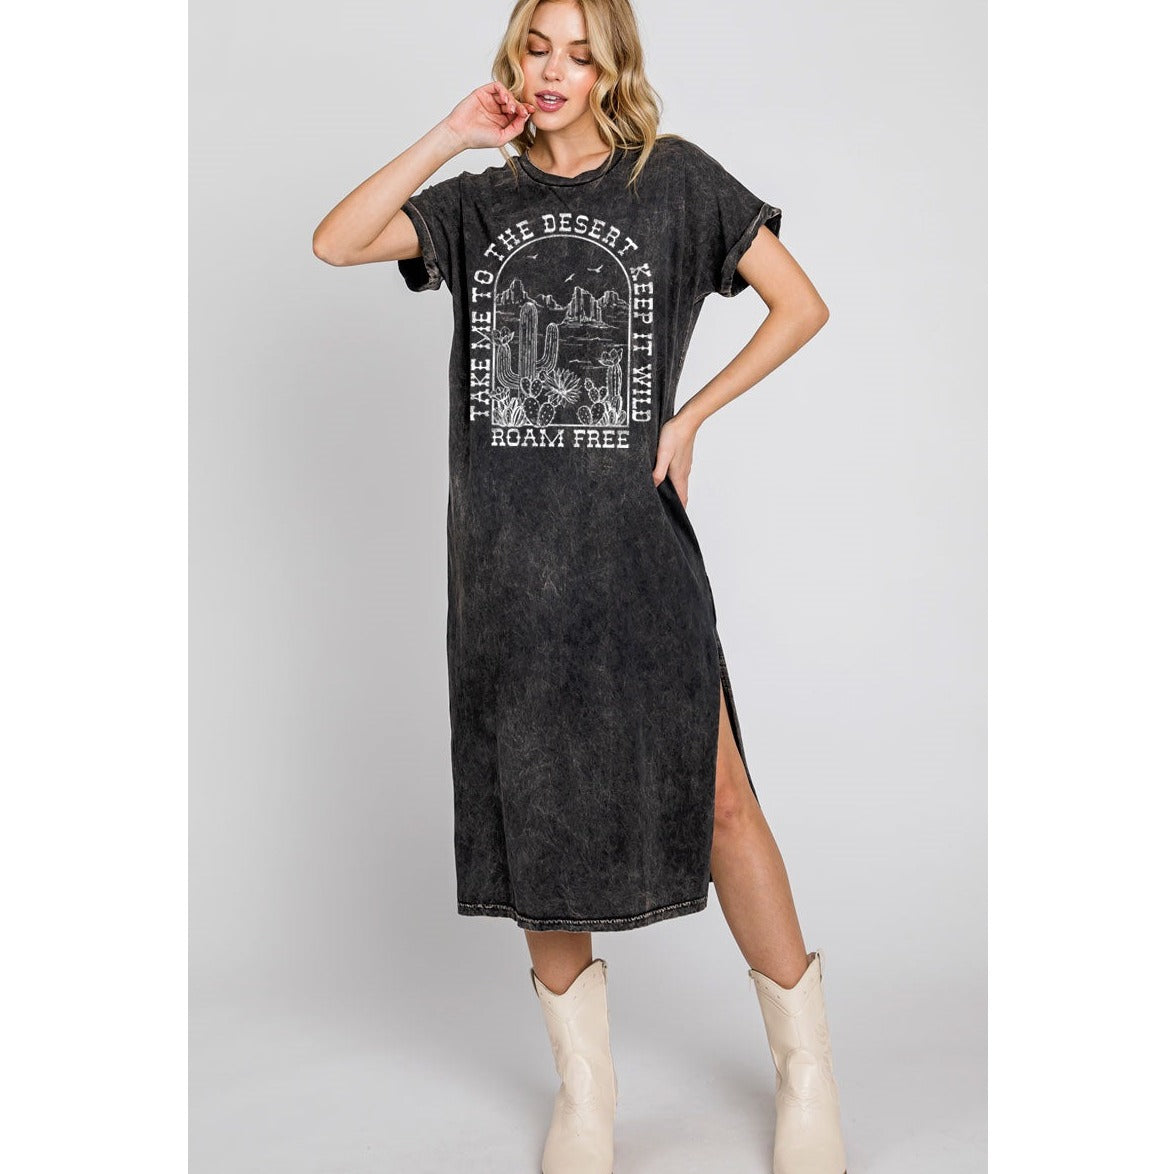 Women's "Take Me To The Desert" Mineral Washed T-Shirt Dress